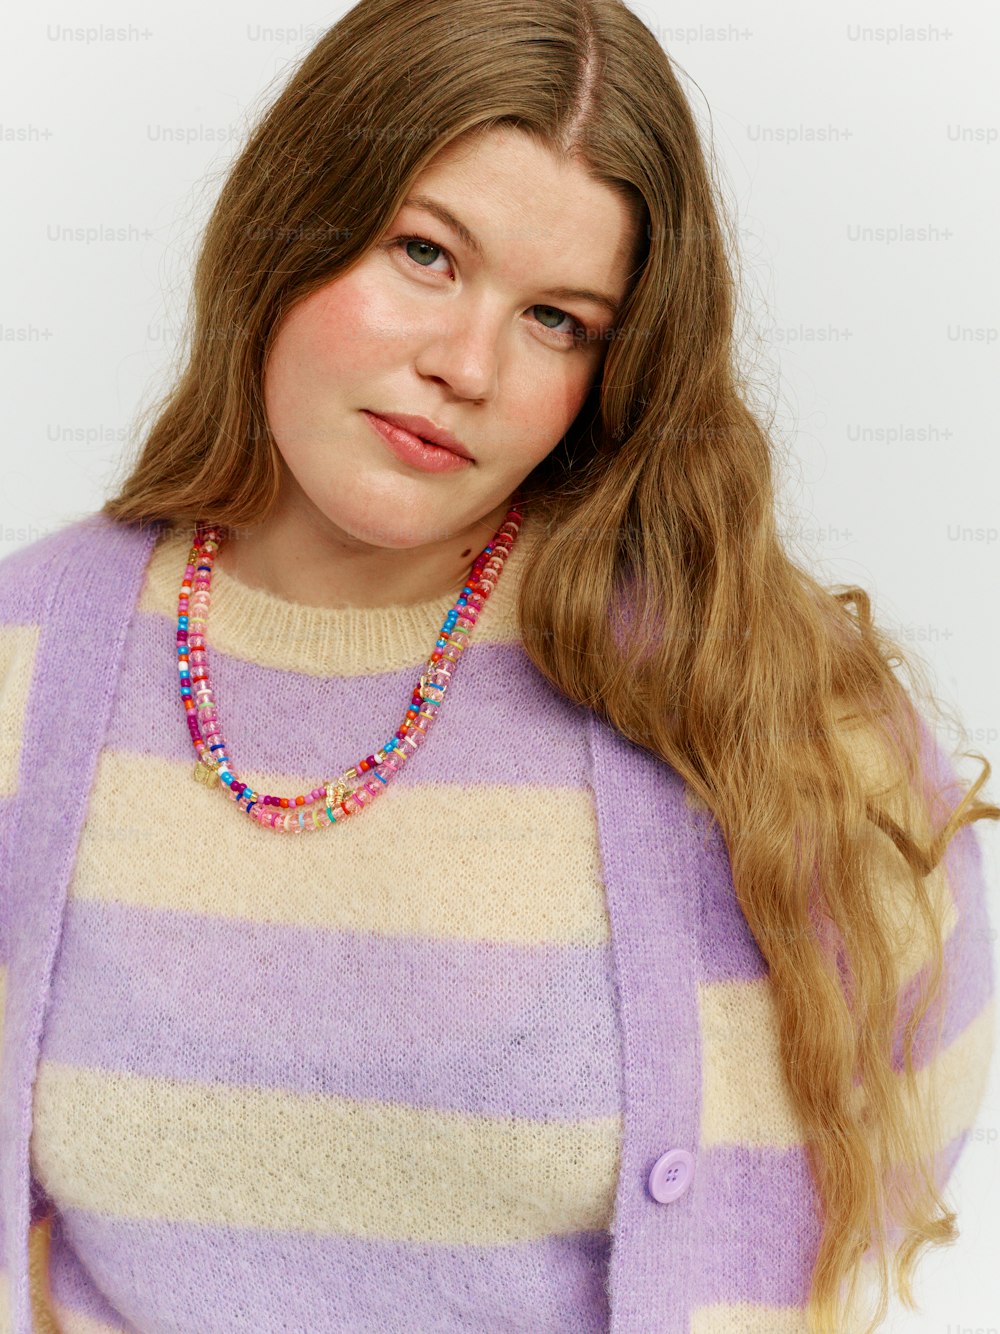 a woman with long hair wearing a purple and white sweater